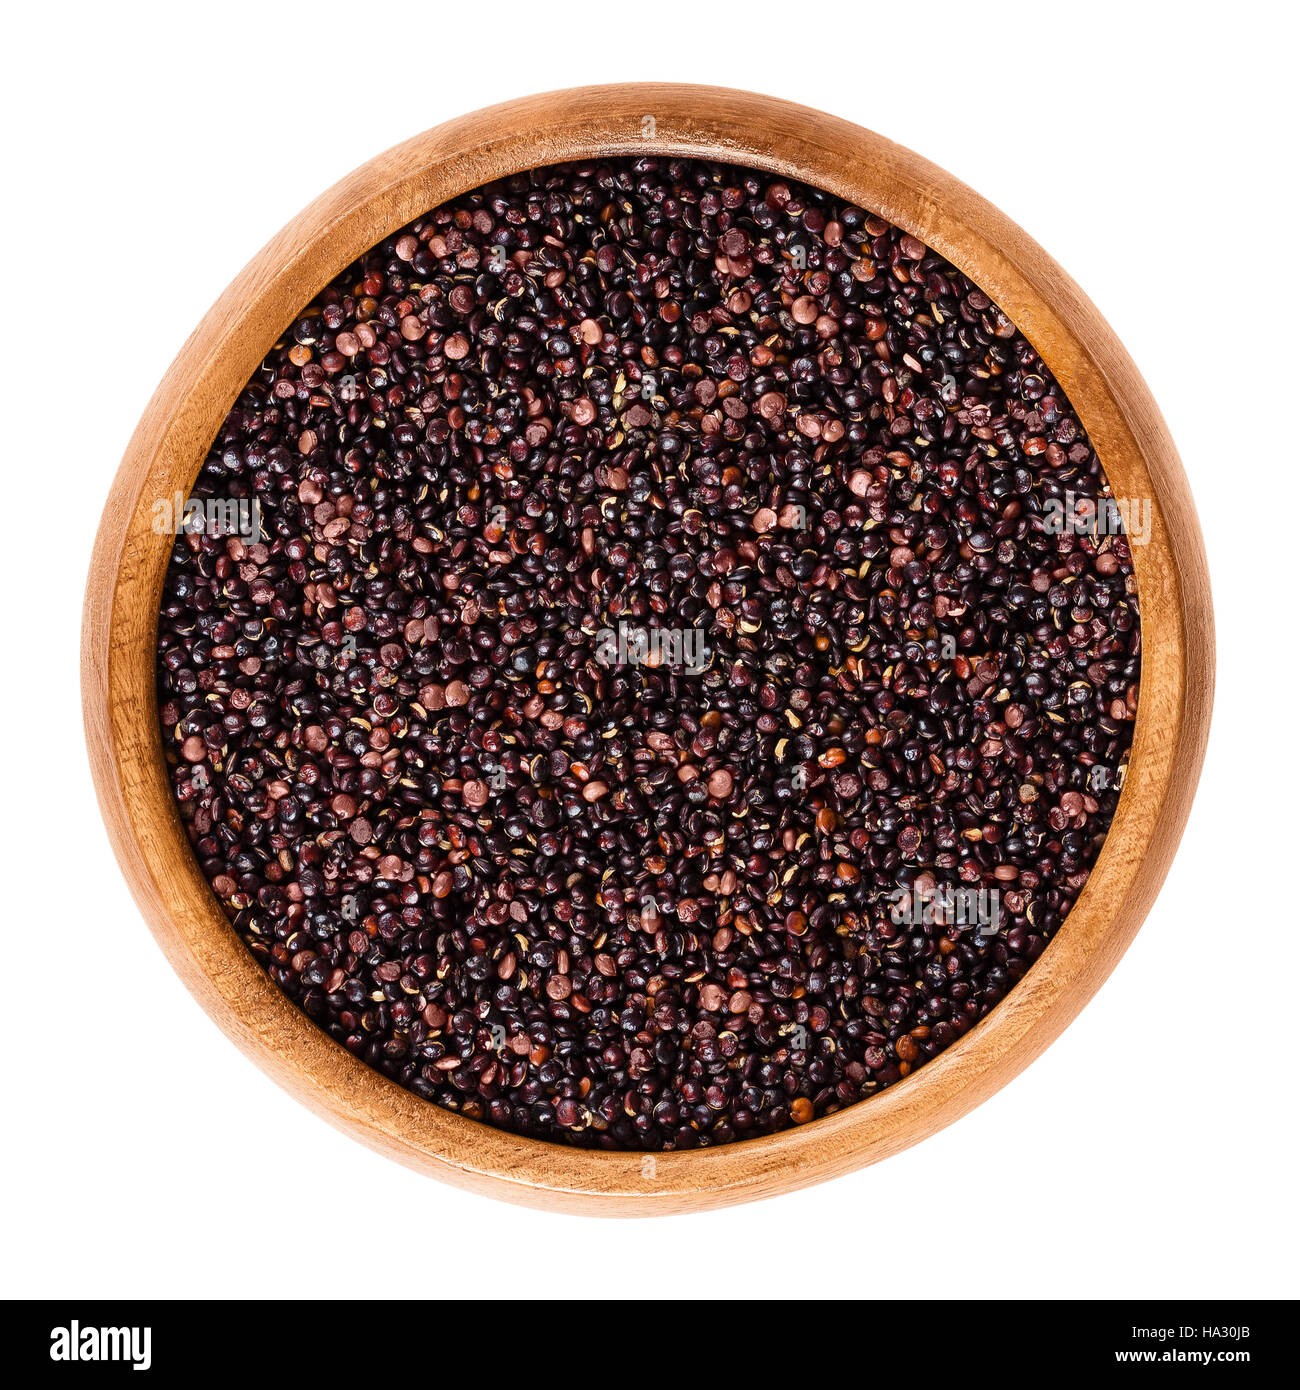 Black quinoa seeds in wooden bowl. Edible fruits of the grain crop Chenopodium quinoa in the Amaranth family is a pseudocereal. Stock Photo